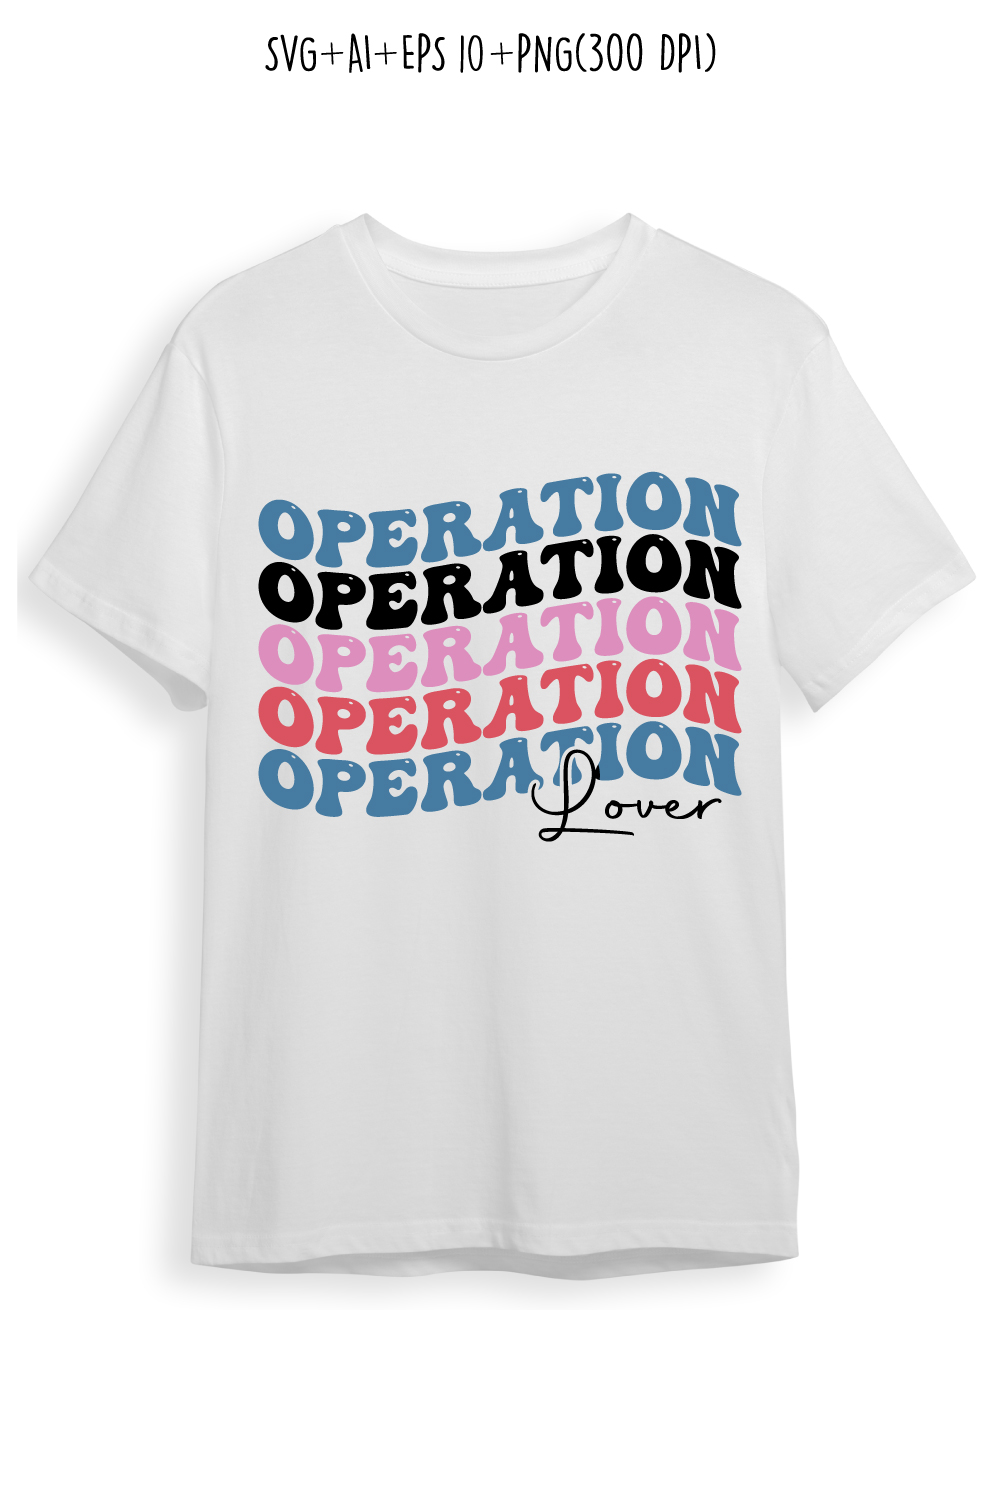 Operation lover indoor game retro typography design for t-shirts, cards, frame artwork, phone cases, bags, mugs, stickers, tumblers, print, etc pinterest preview image.